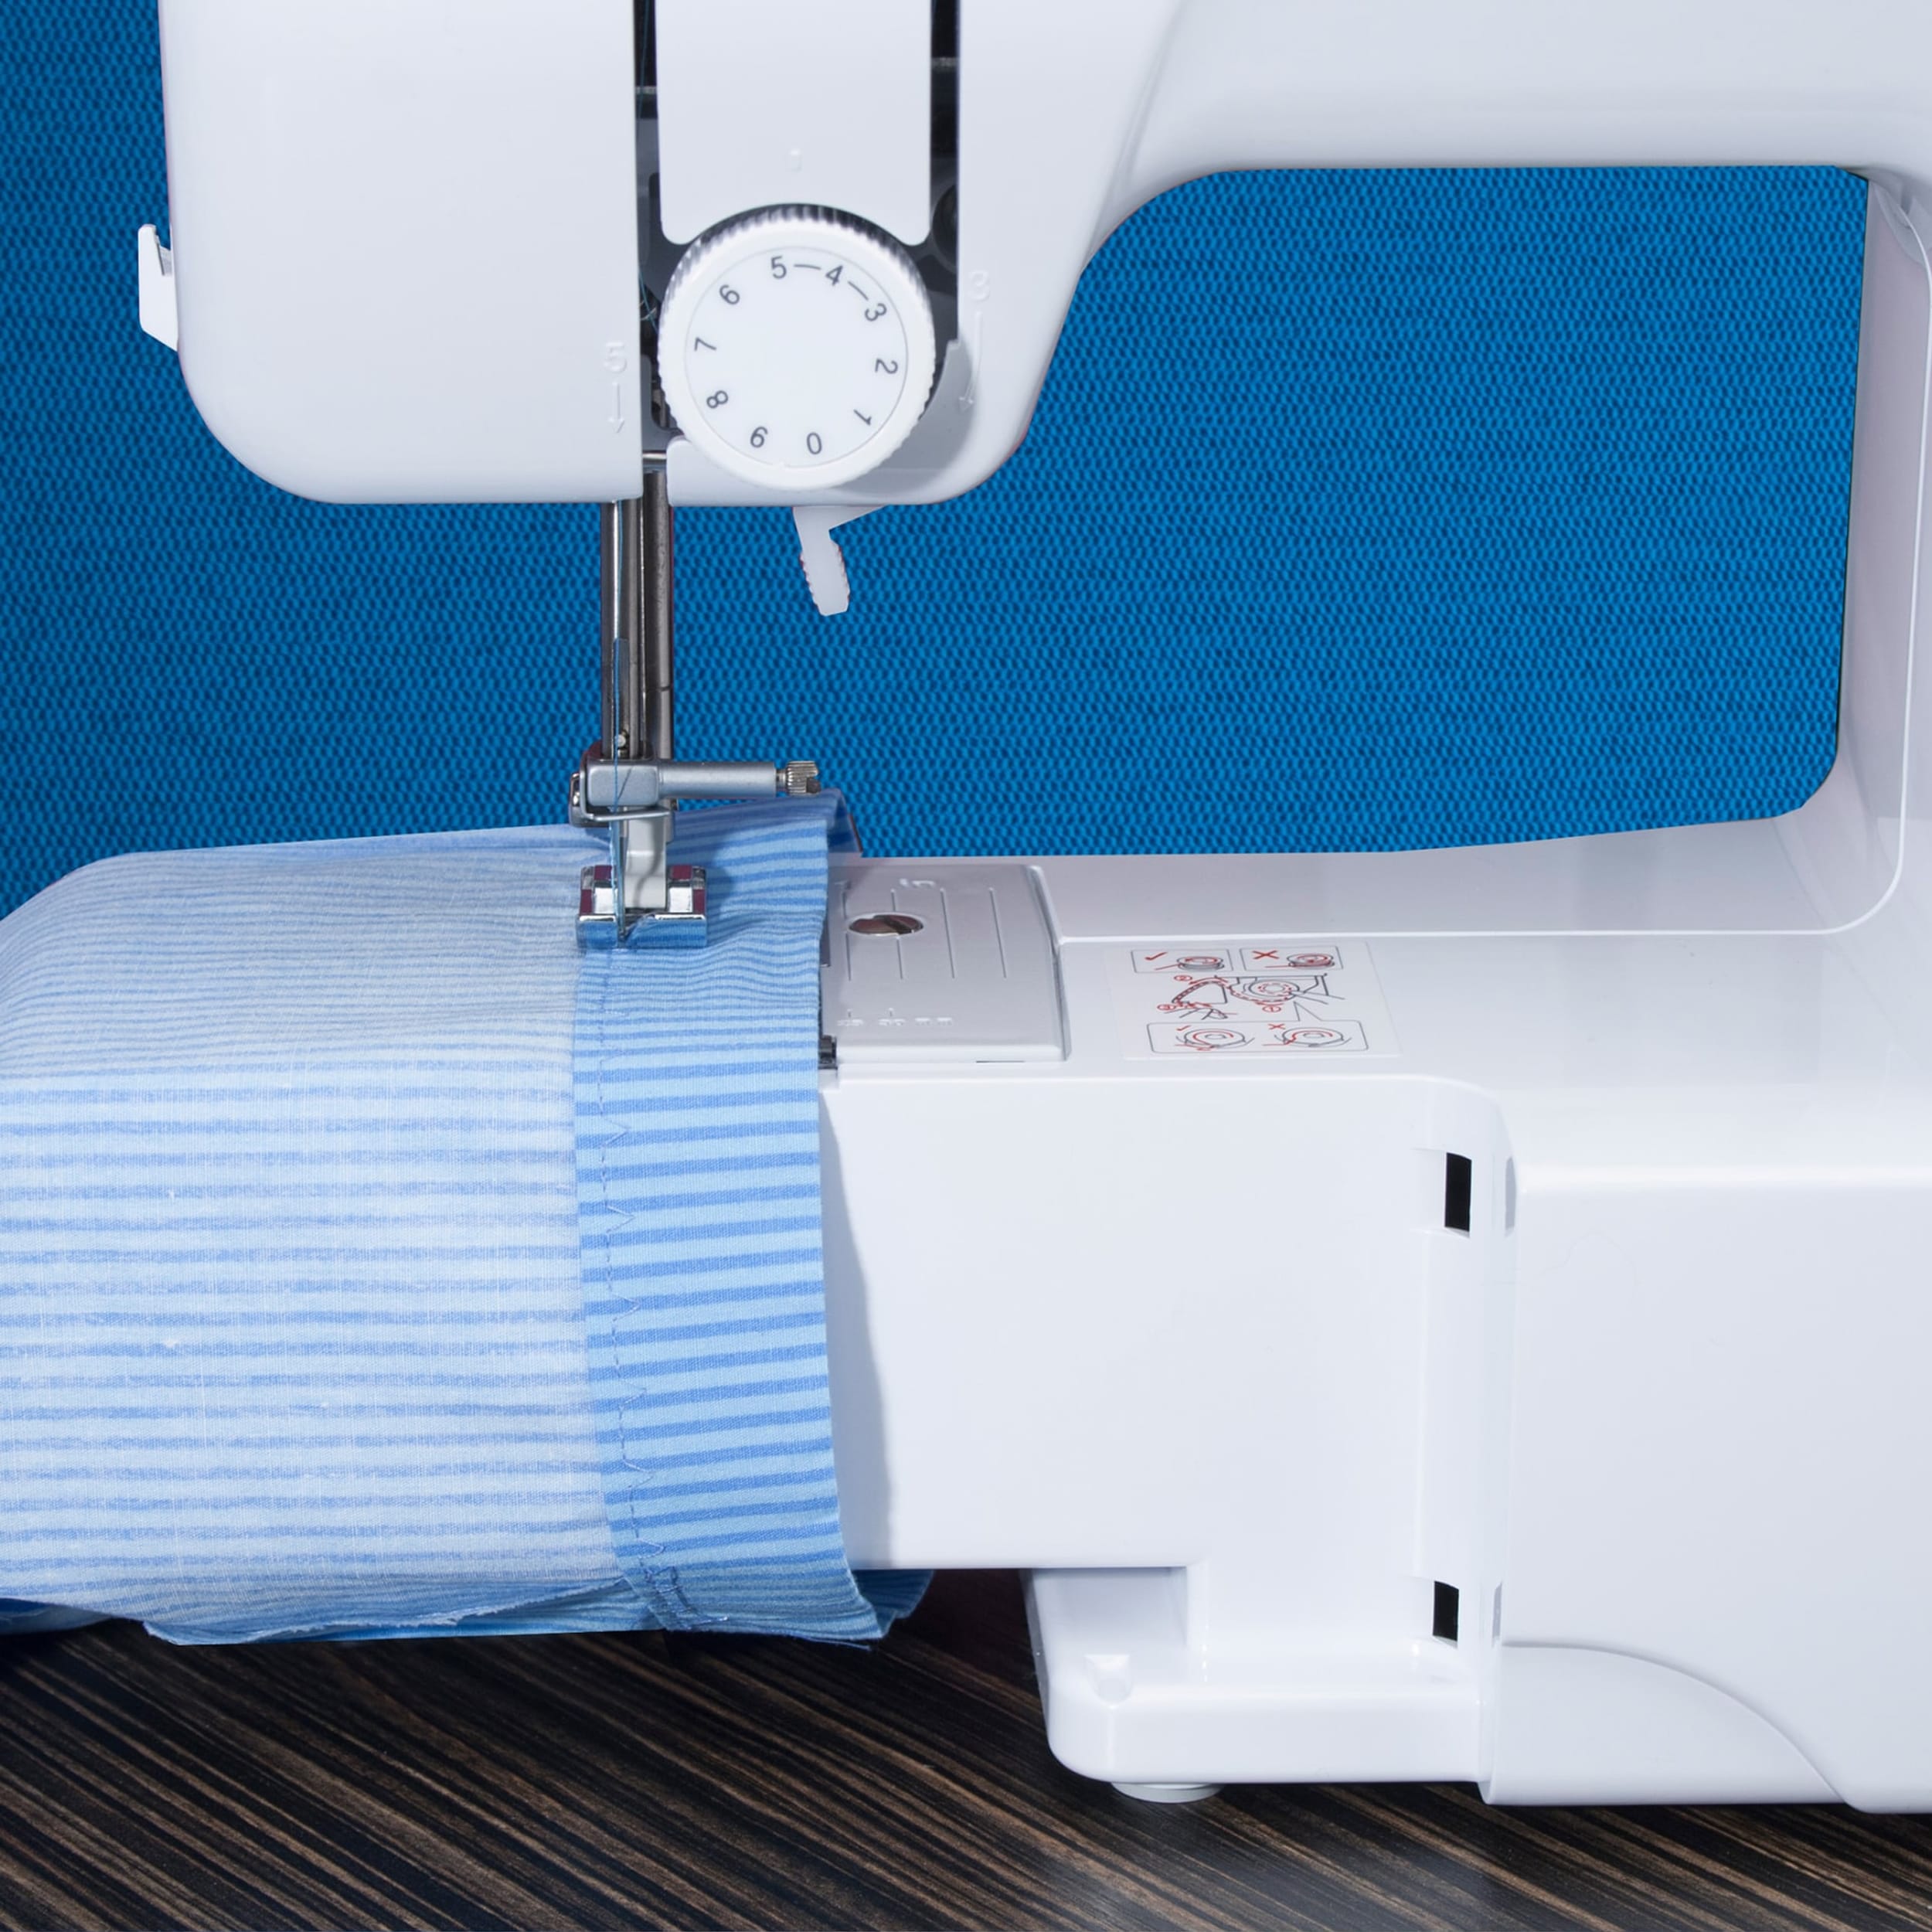 Level up your sewing game with the Brother SE700 sewing and